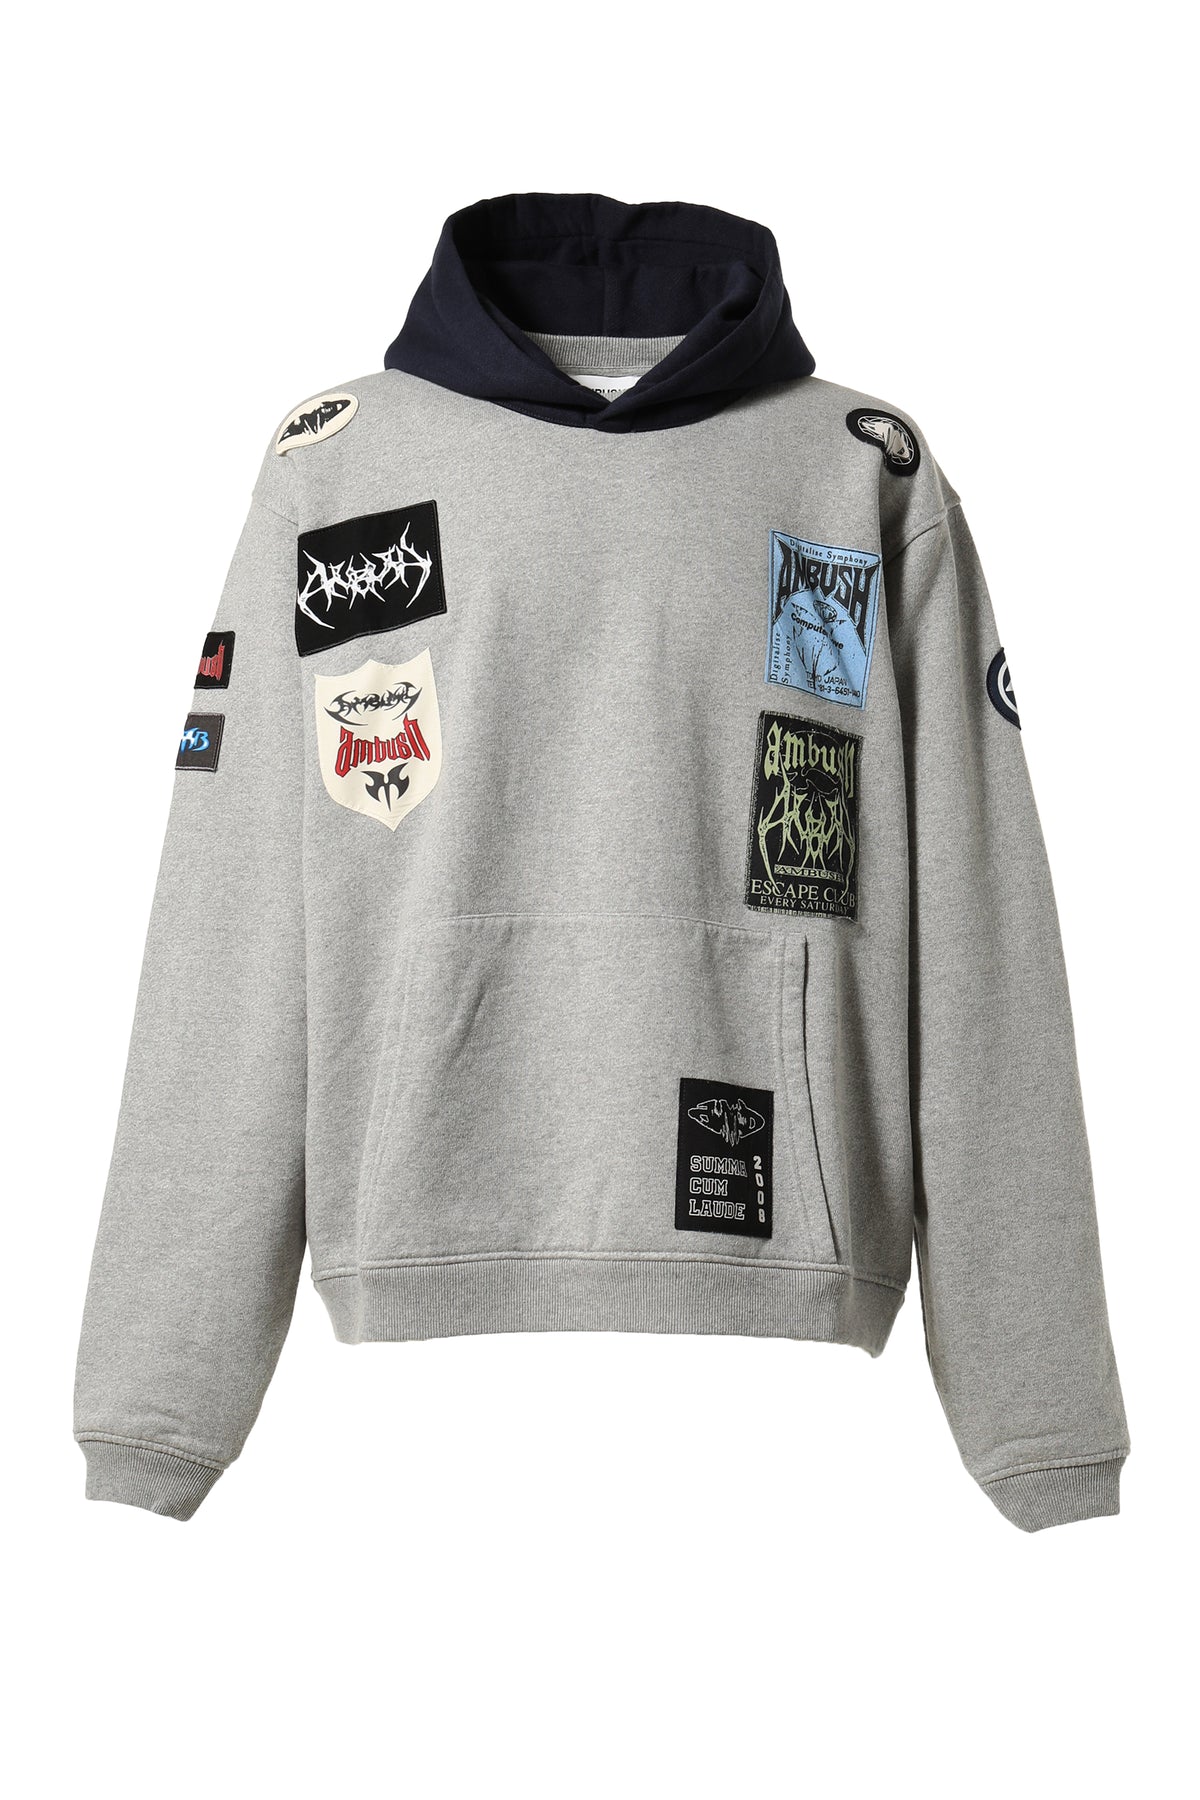 AFTER HOODED SWEATSHIRT / GRY NVY